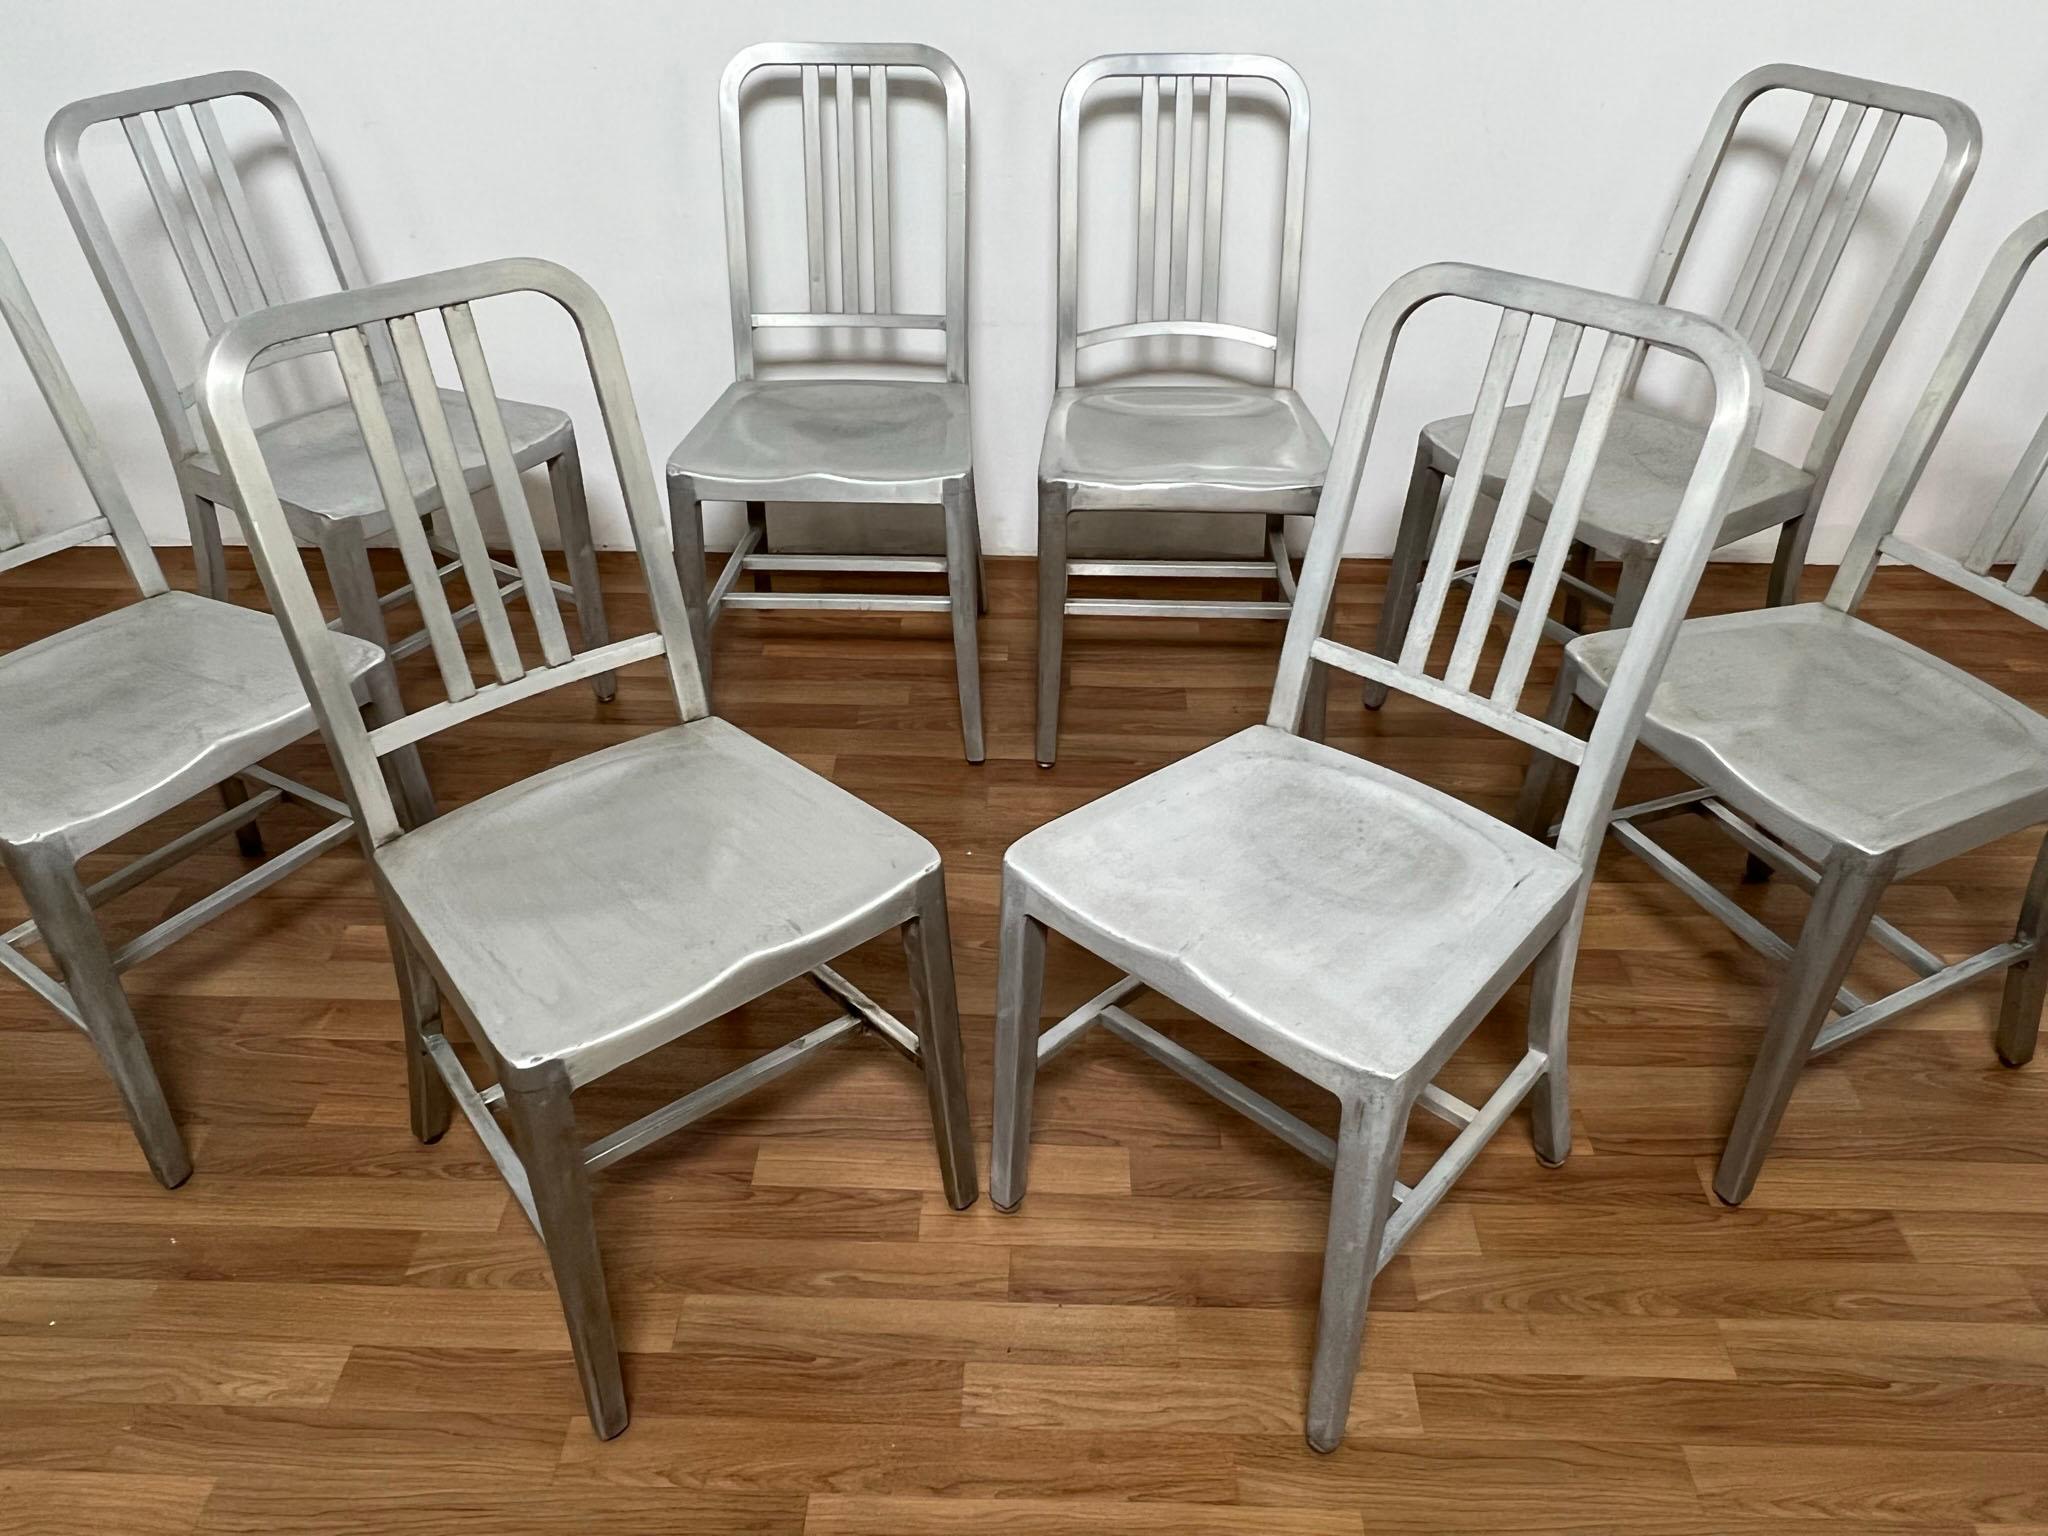 A set of eight original GoodForm aluminum”Navy” chairs, ca. 1940s. The General Fireproofing Company of Youngstown, OH. first introduced this model 4295 chair in 1931 and it became an instant classic of American streamline design. In 1944 the